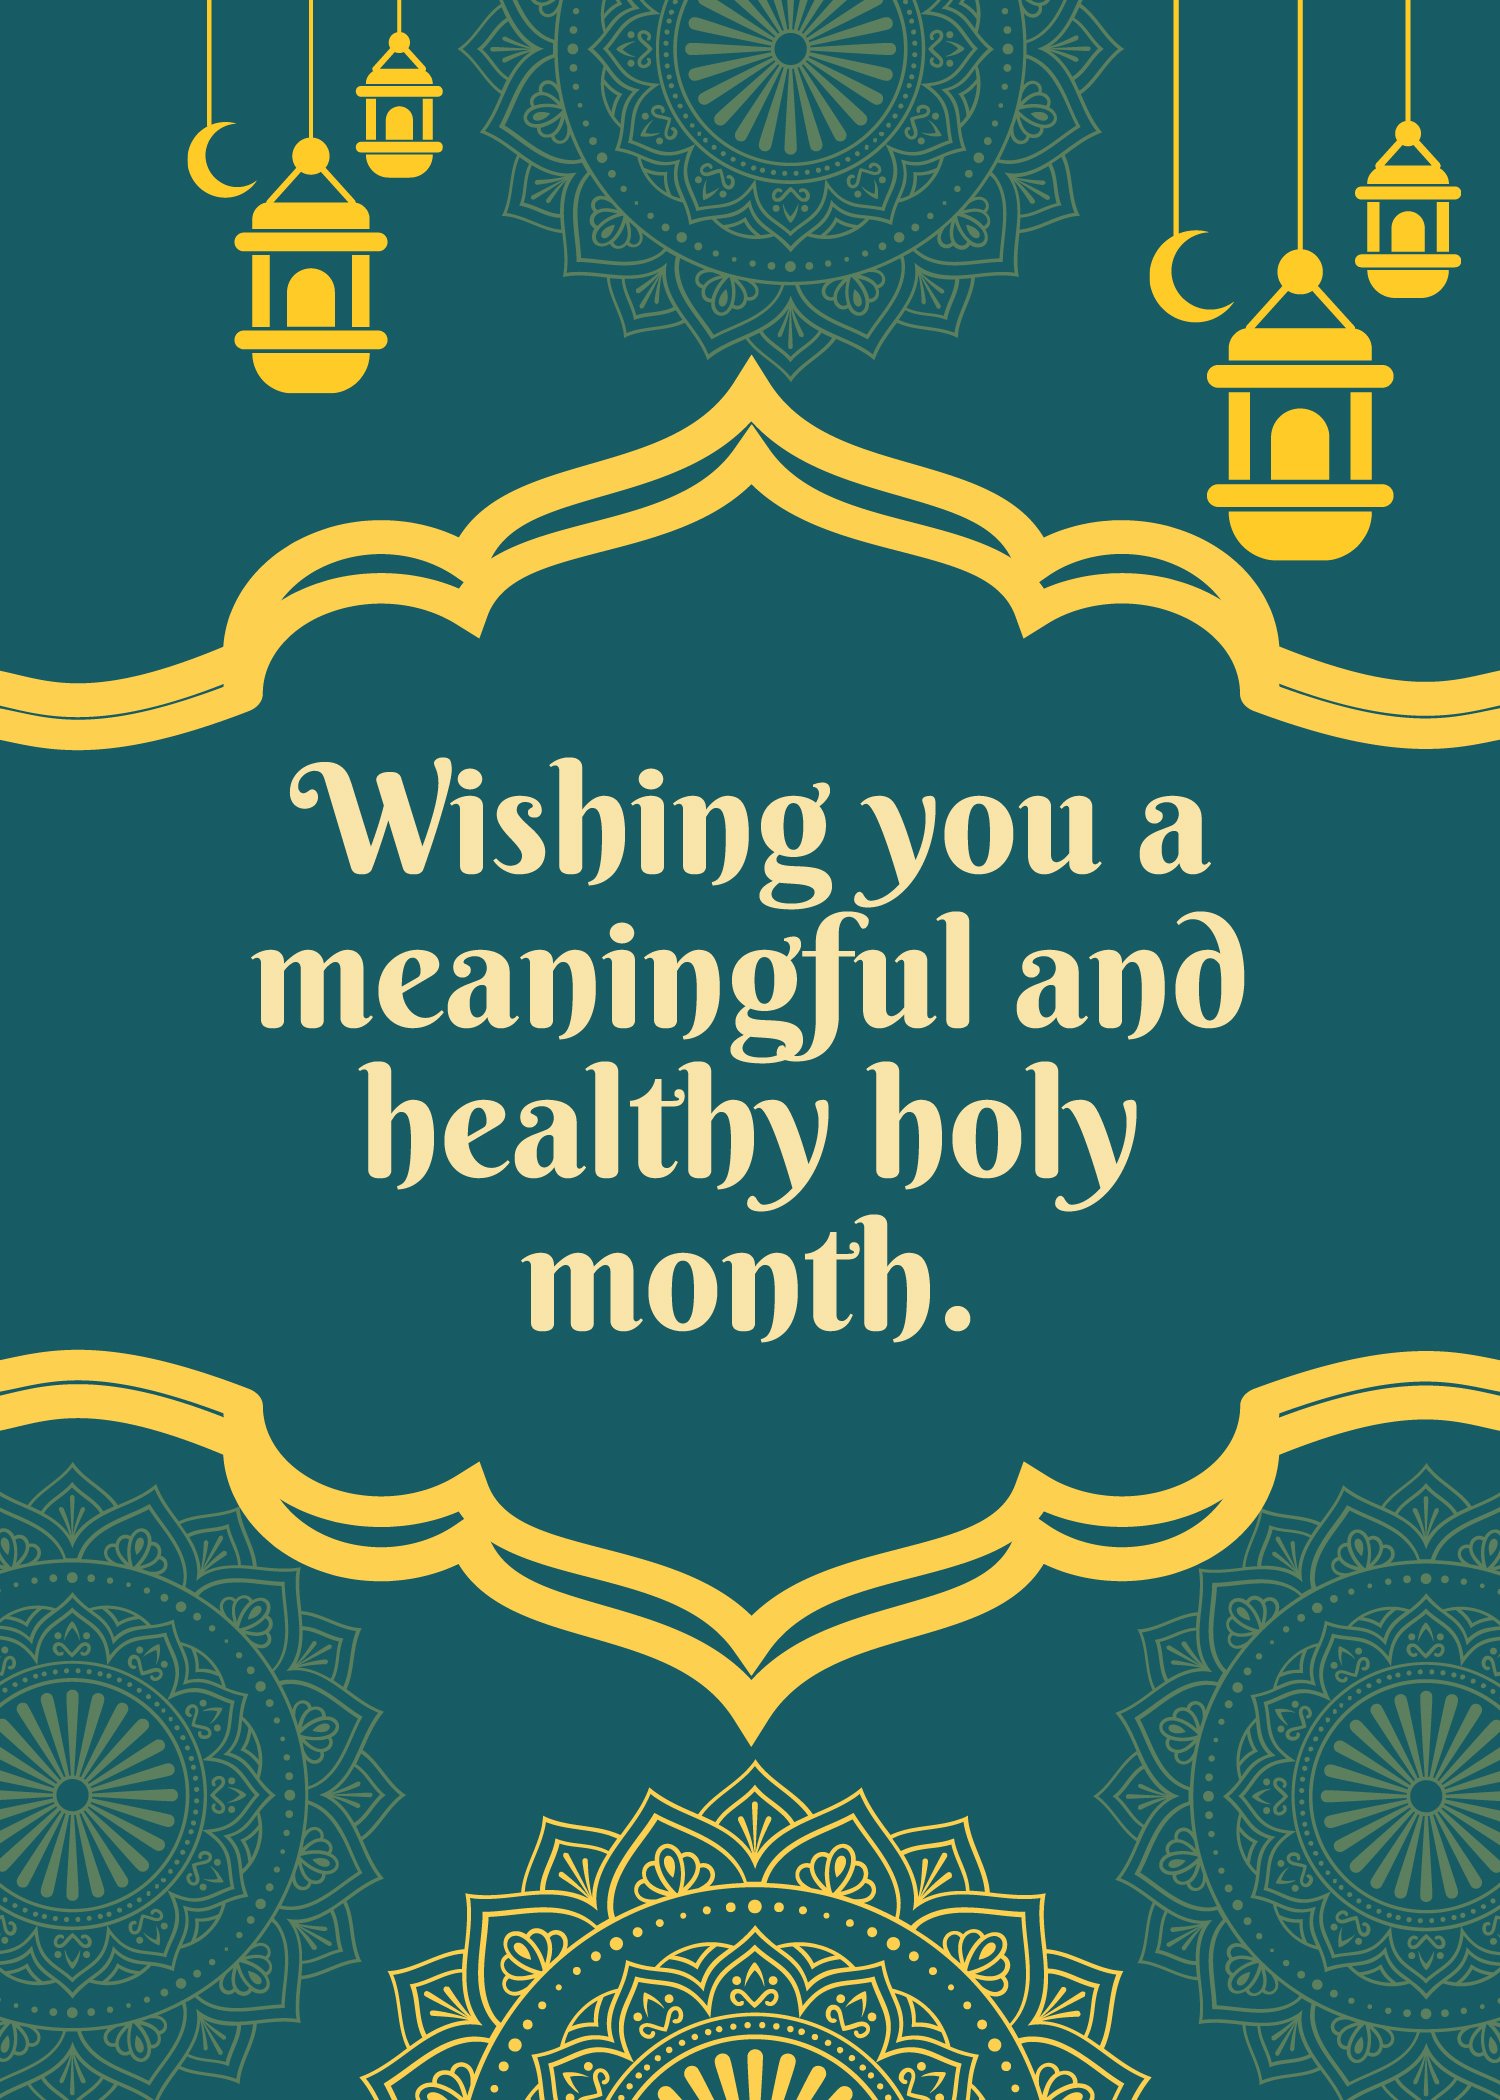 Ramadan Best Wishes in Word, Google Docs, Illustrator, PSD, Apple Pages, EPS, SVG, JPG, PNG